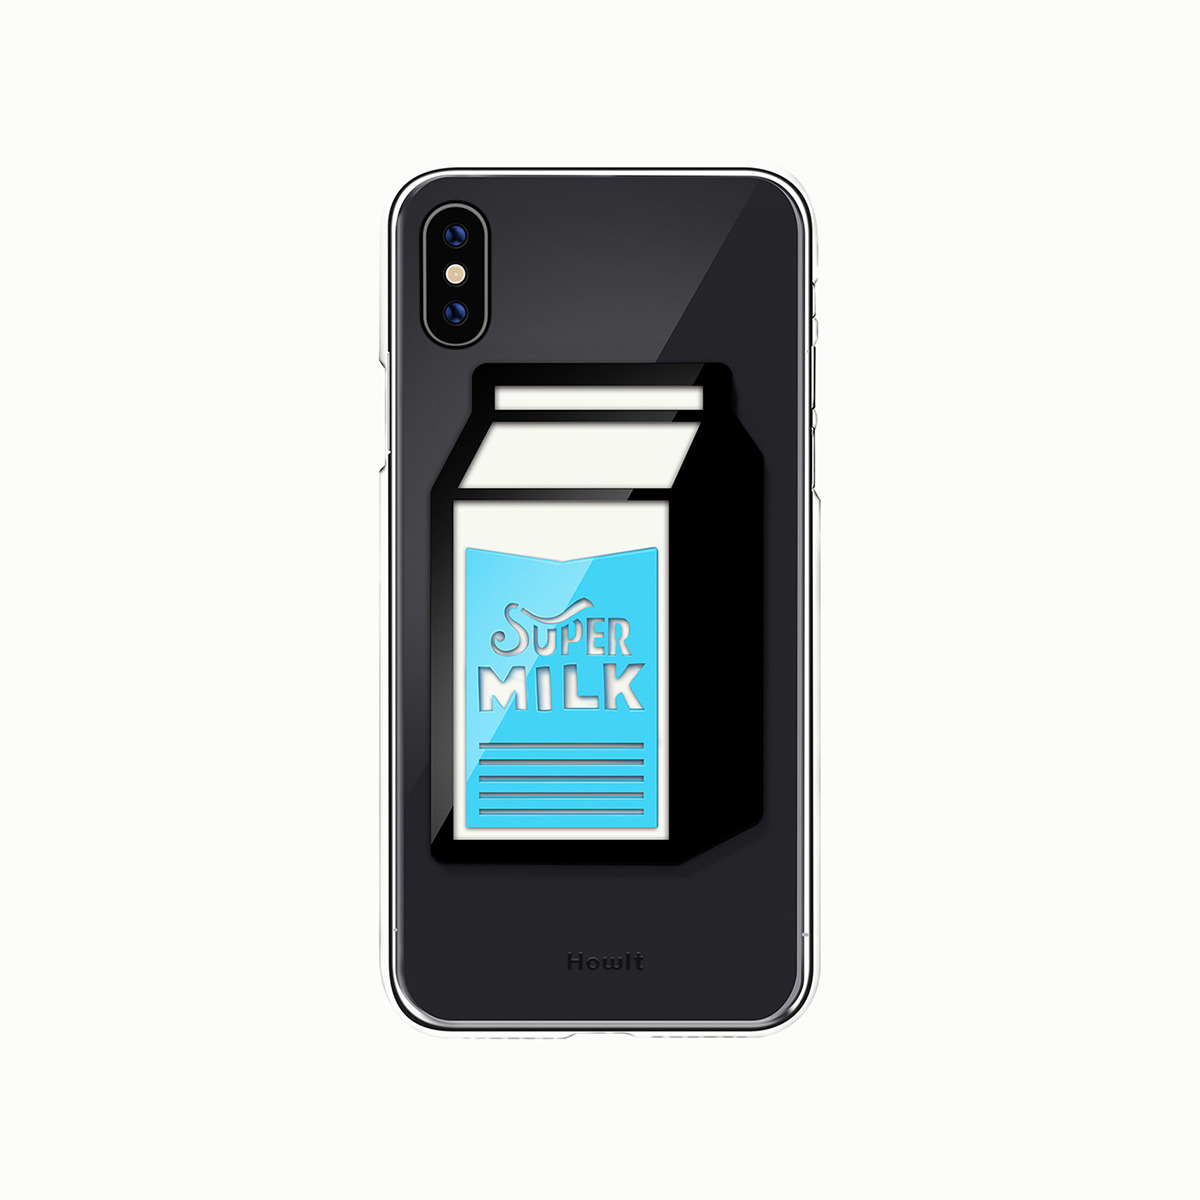 iphonecase iphone smartphone product case cover iphonex howlt store